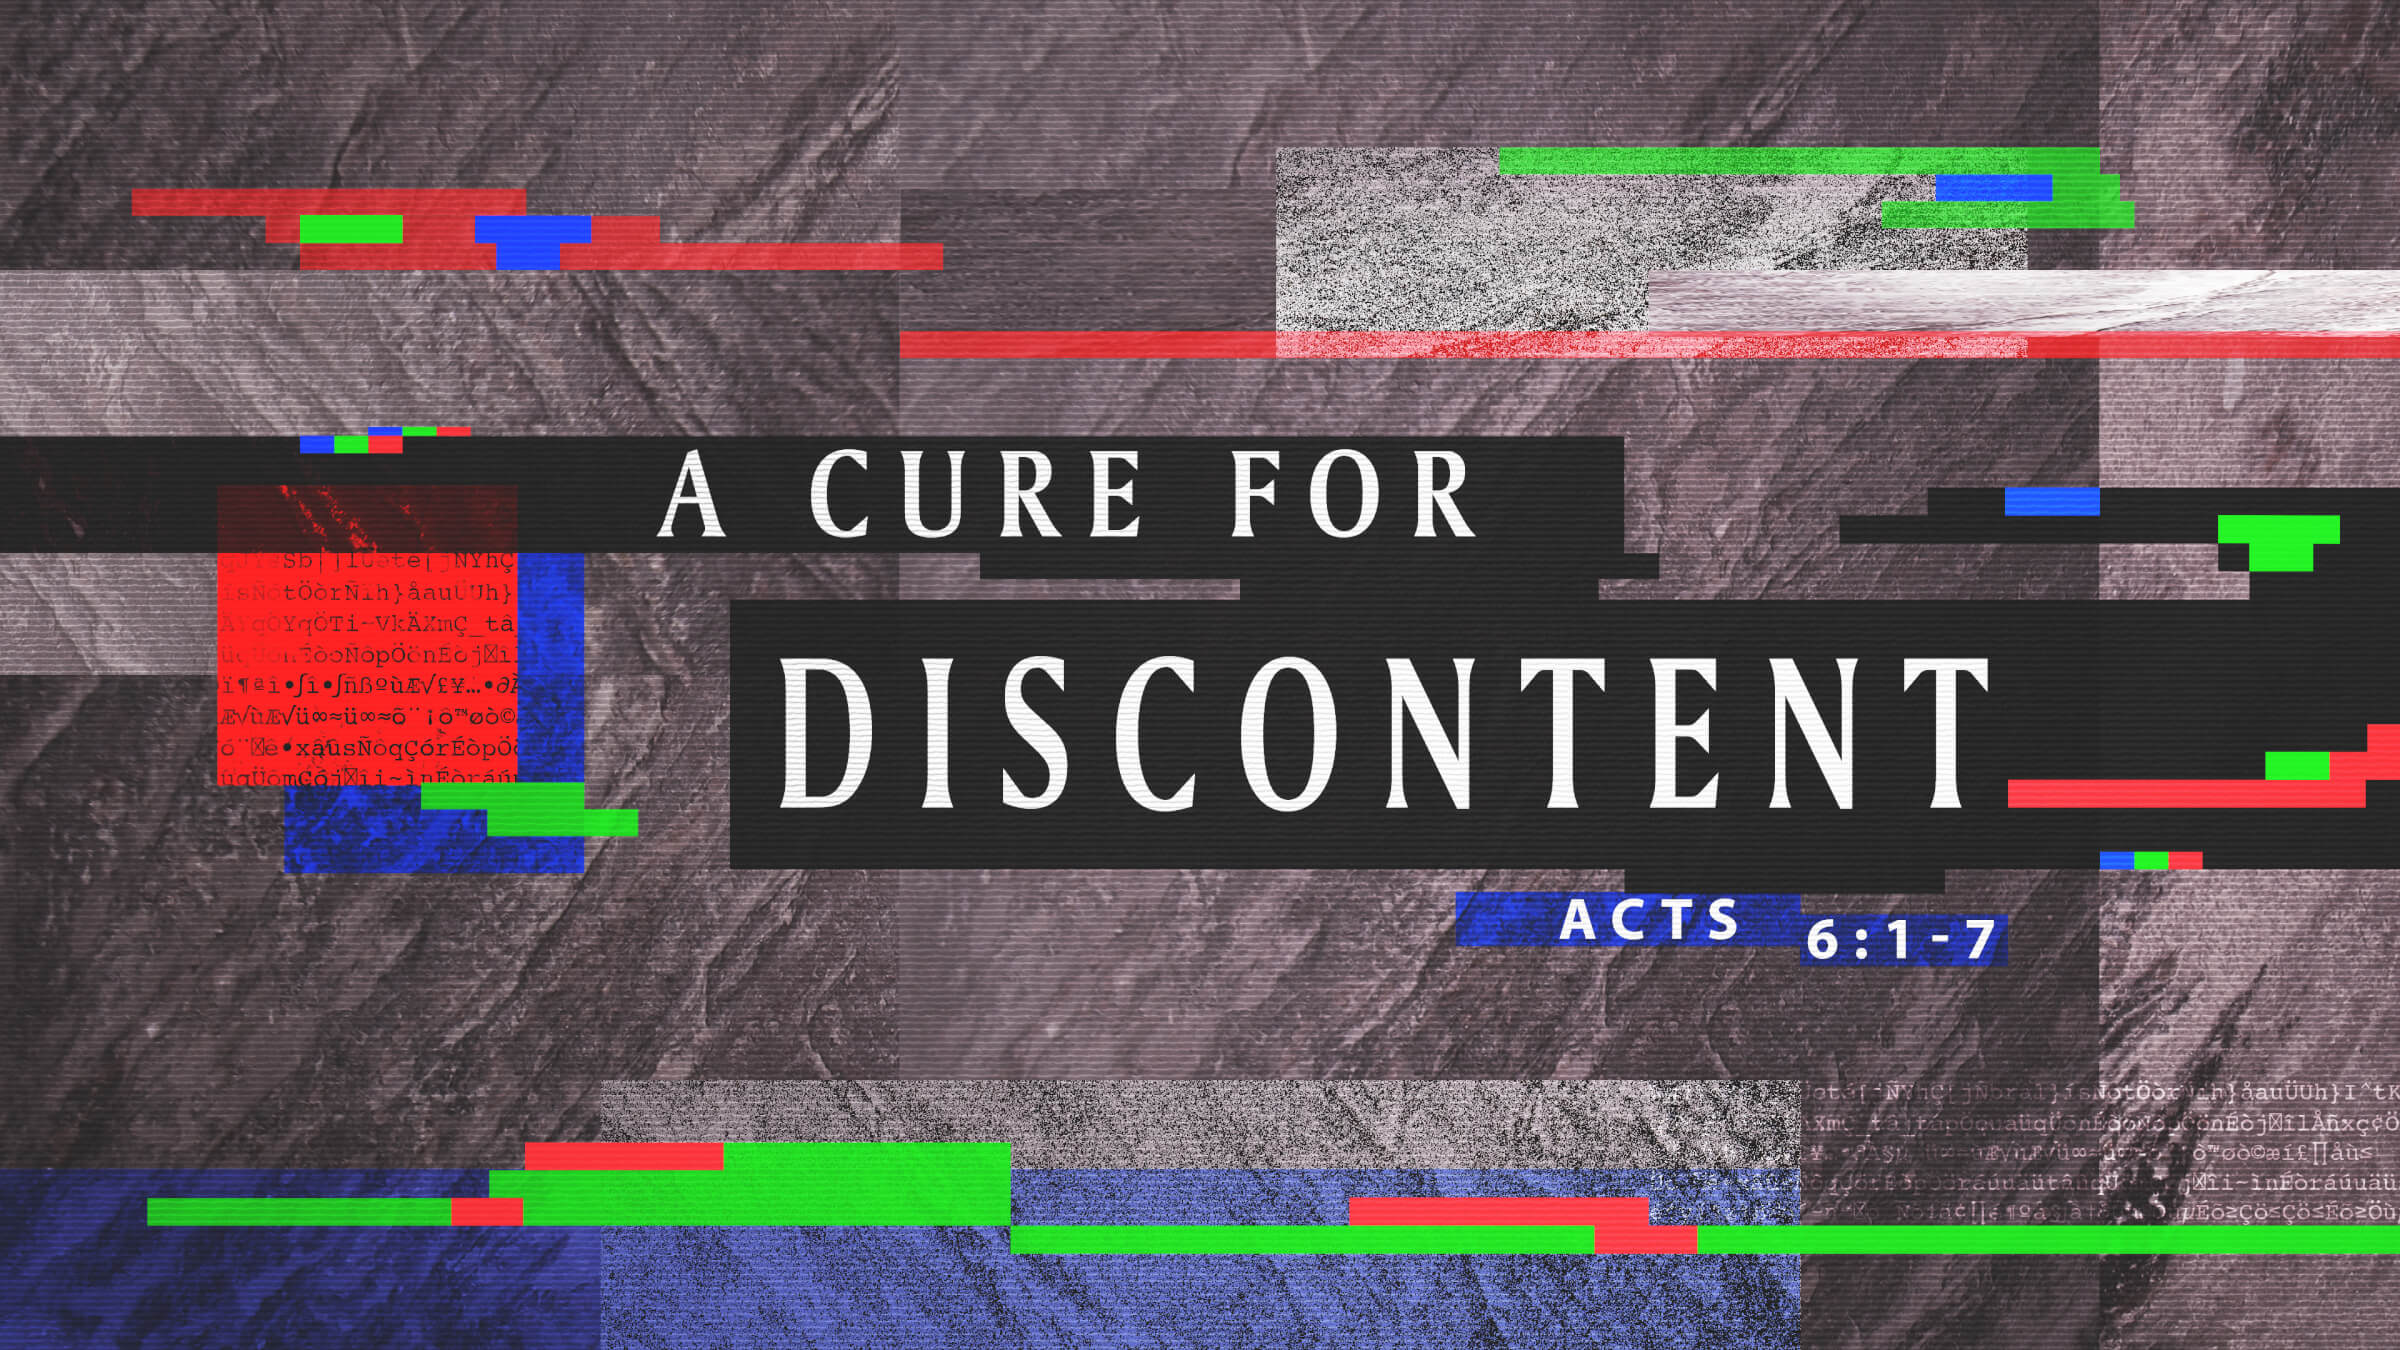 A Cure for Discontent